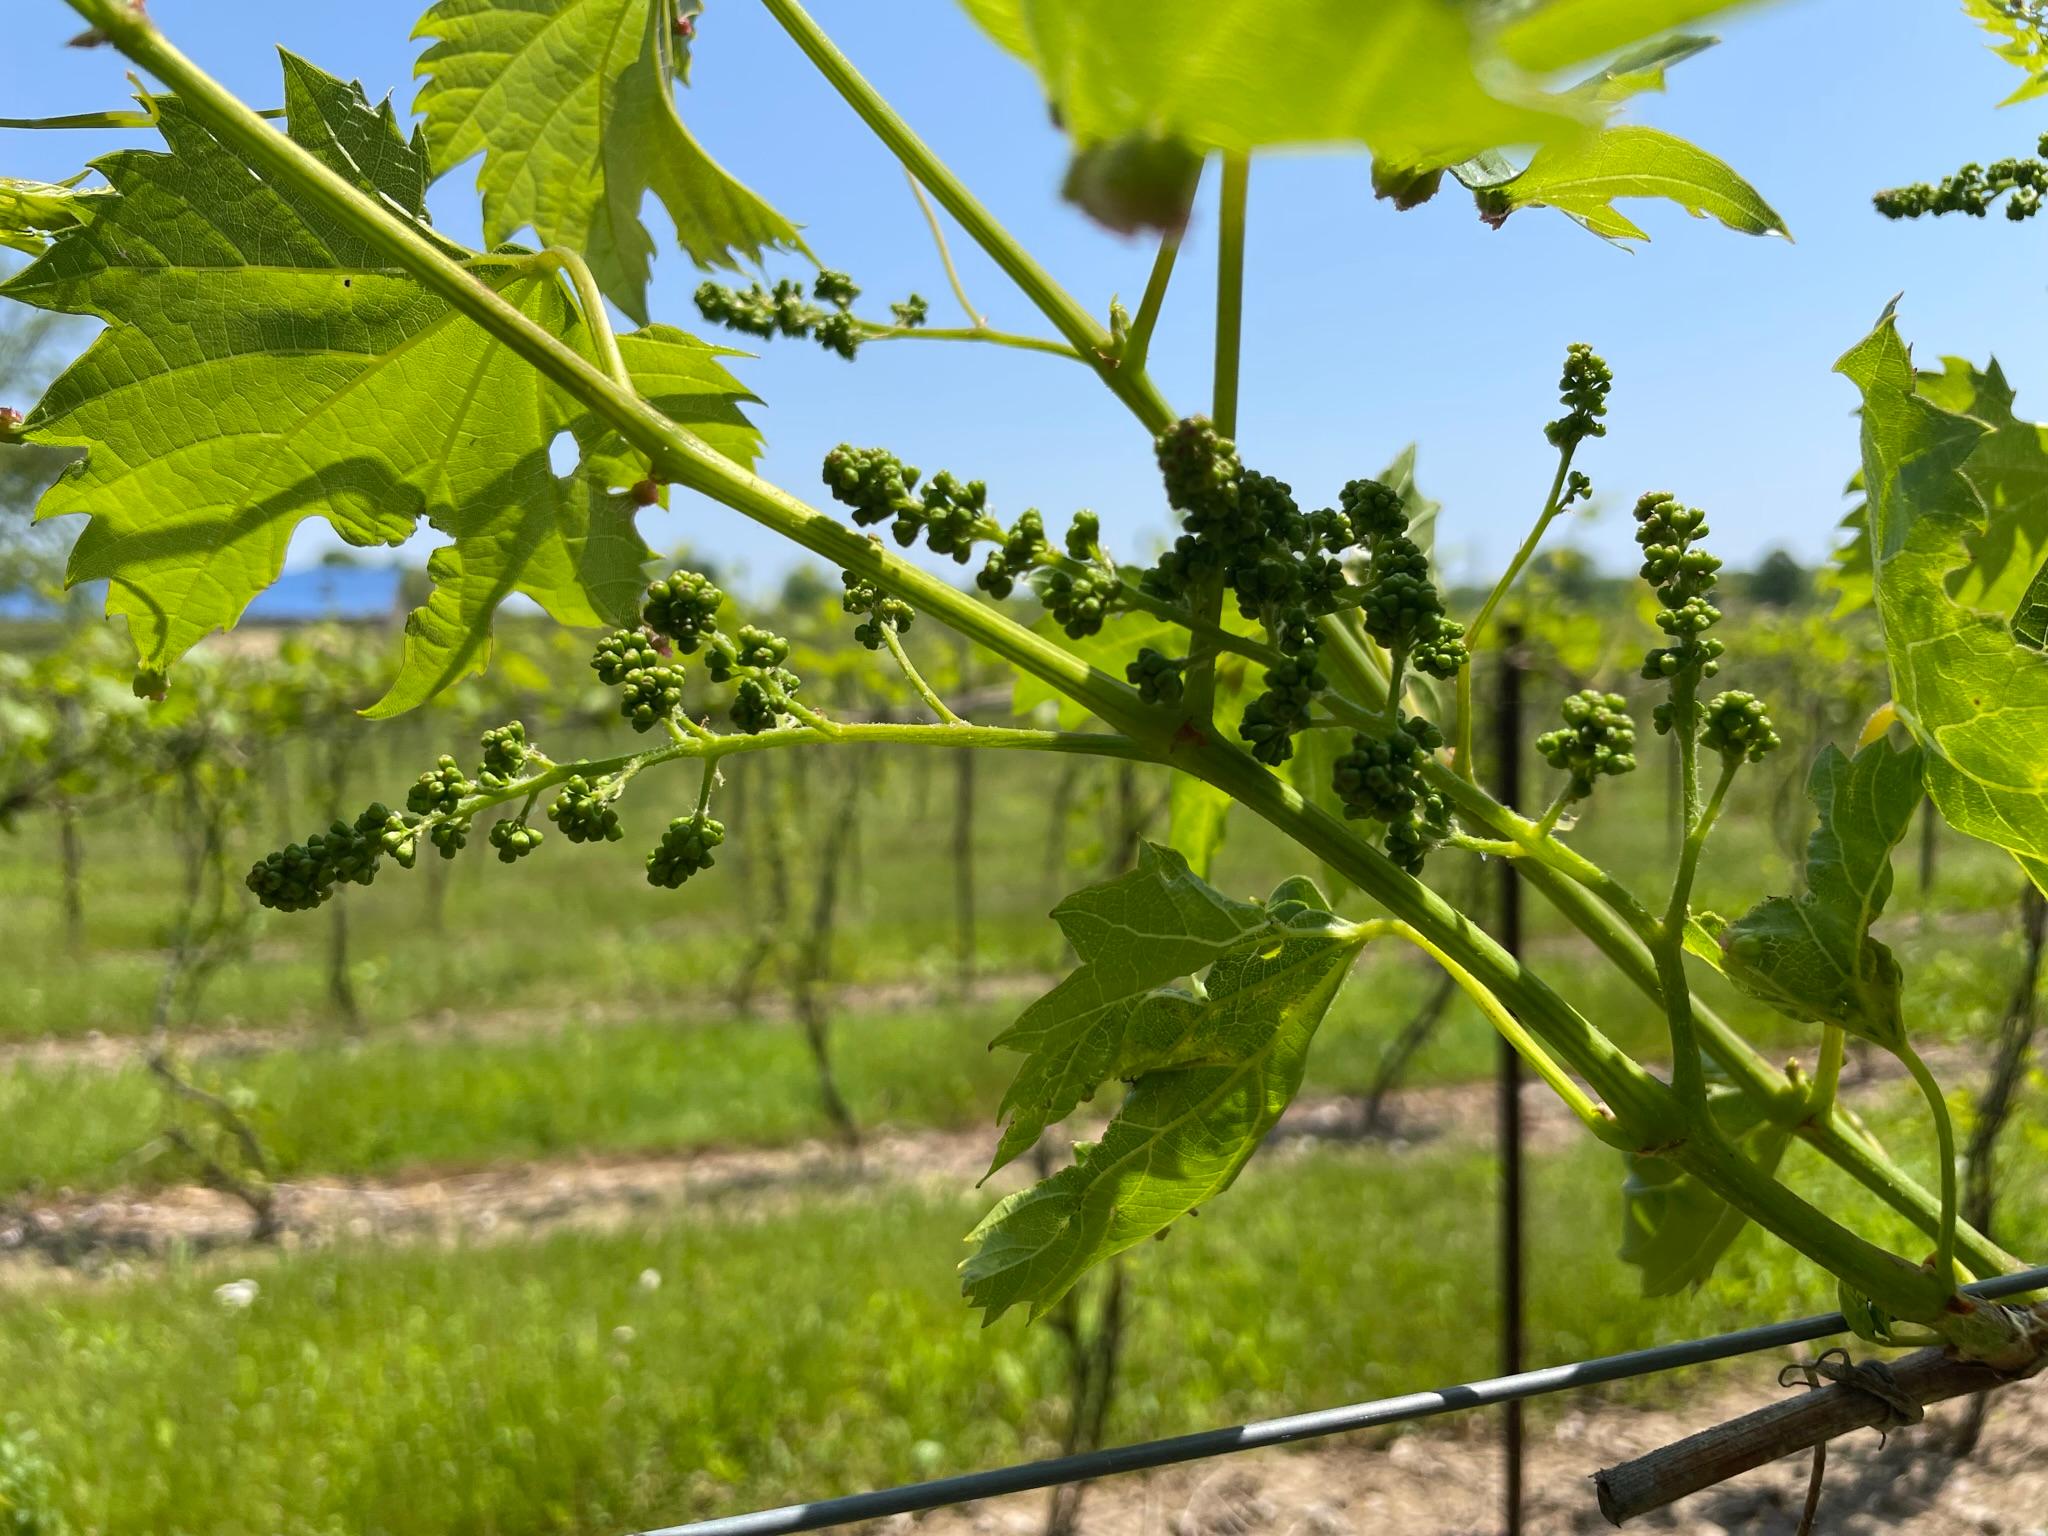 Inflorescence swelling in Frontenac grapes 